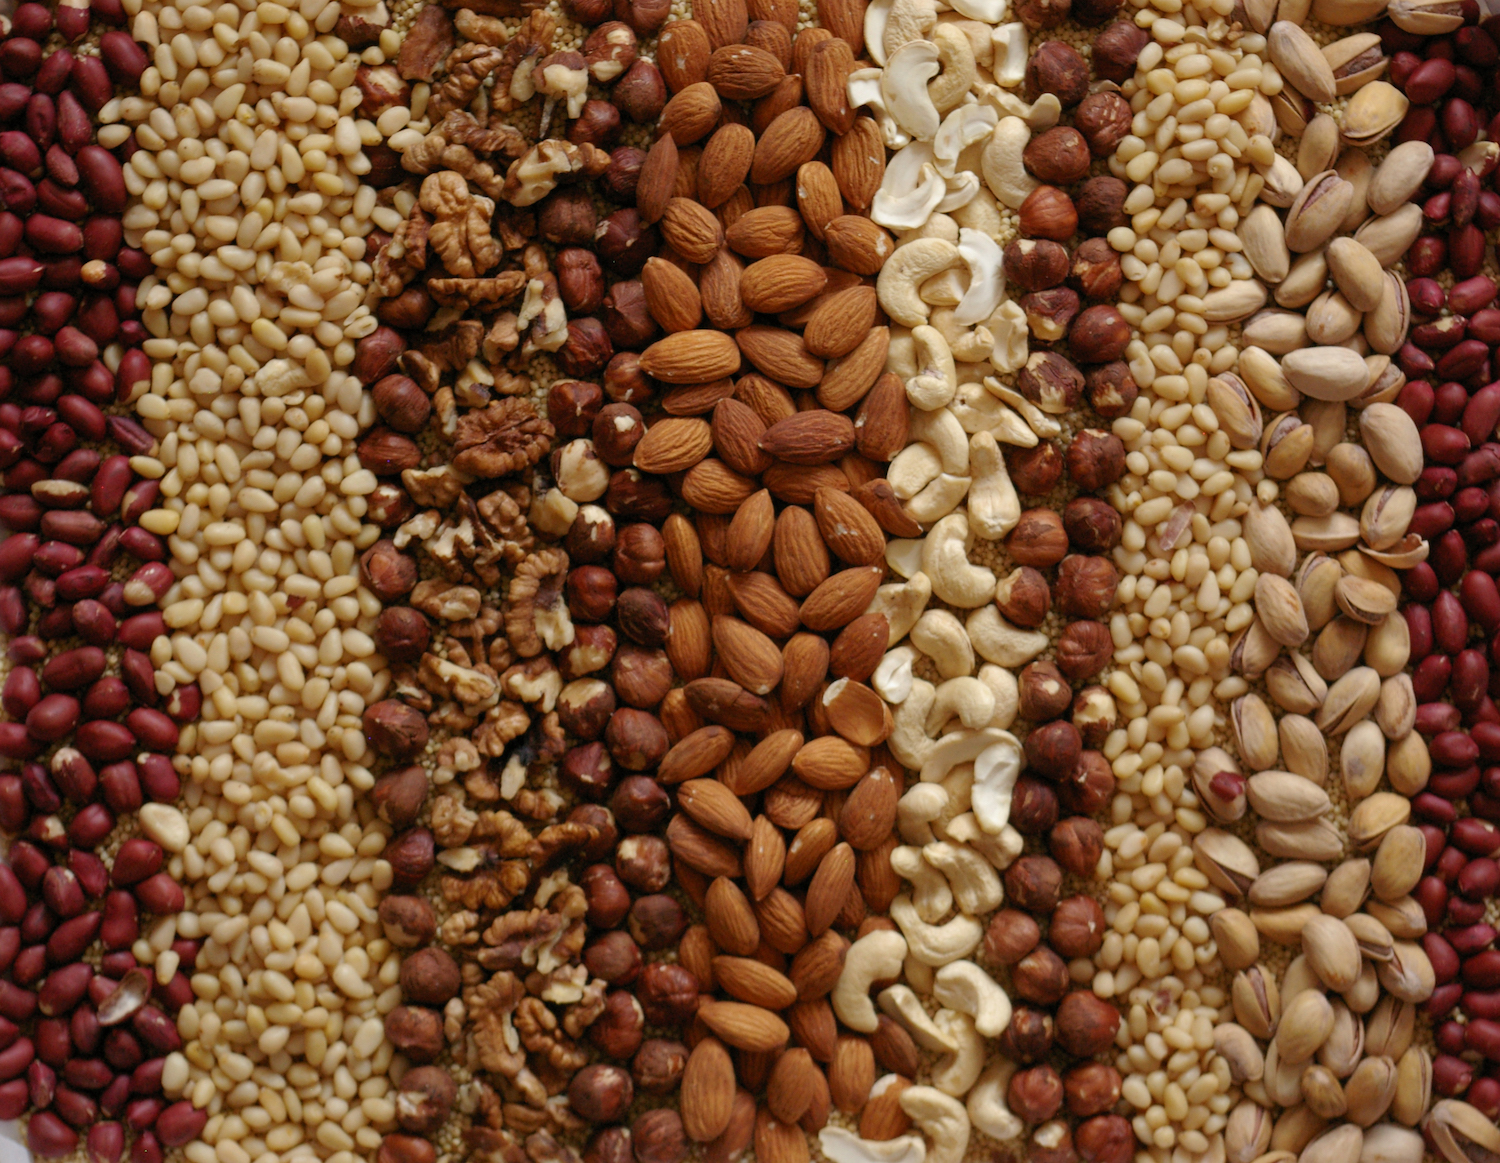 USDA research shows nuts have fewer calories